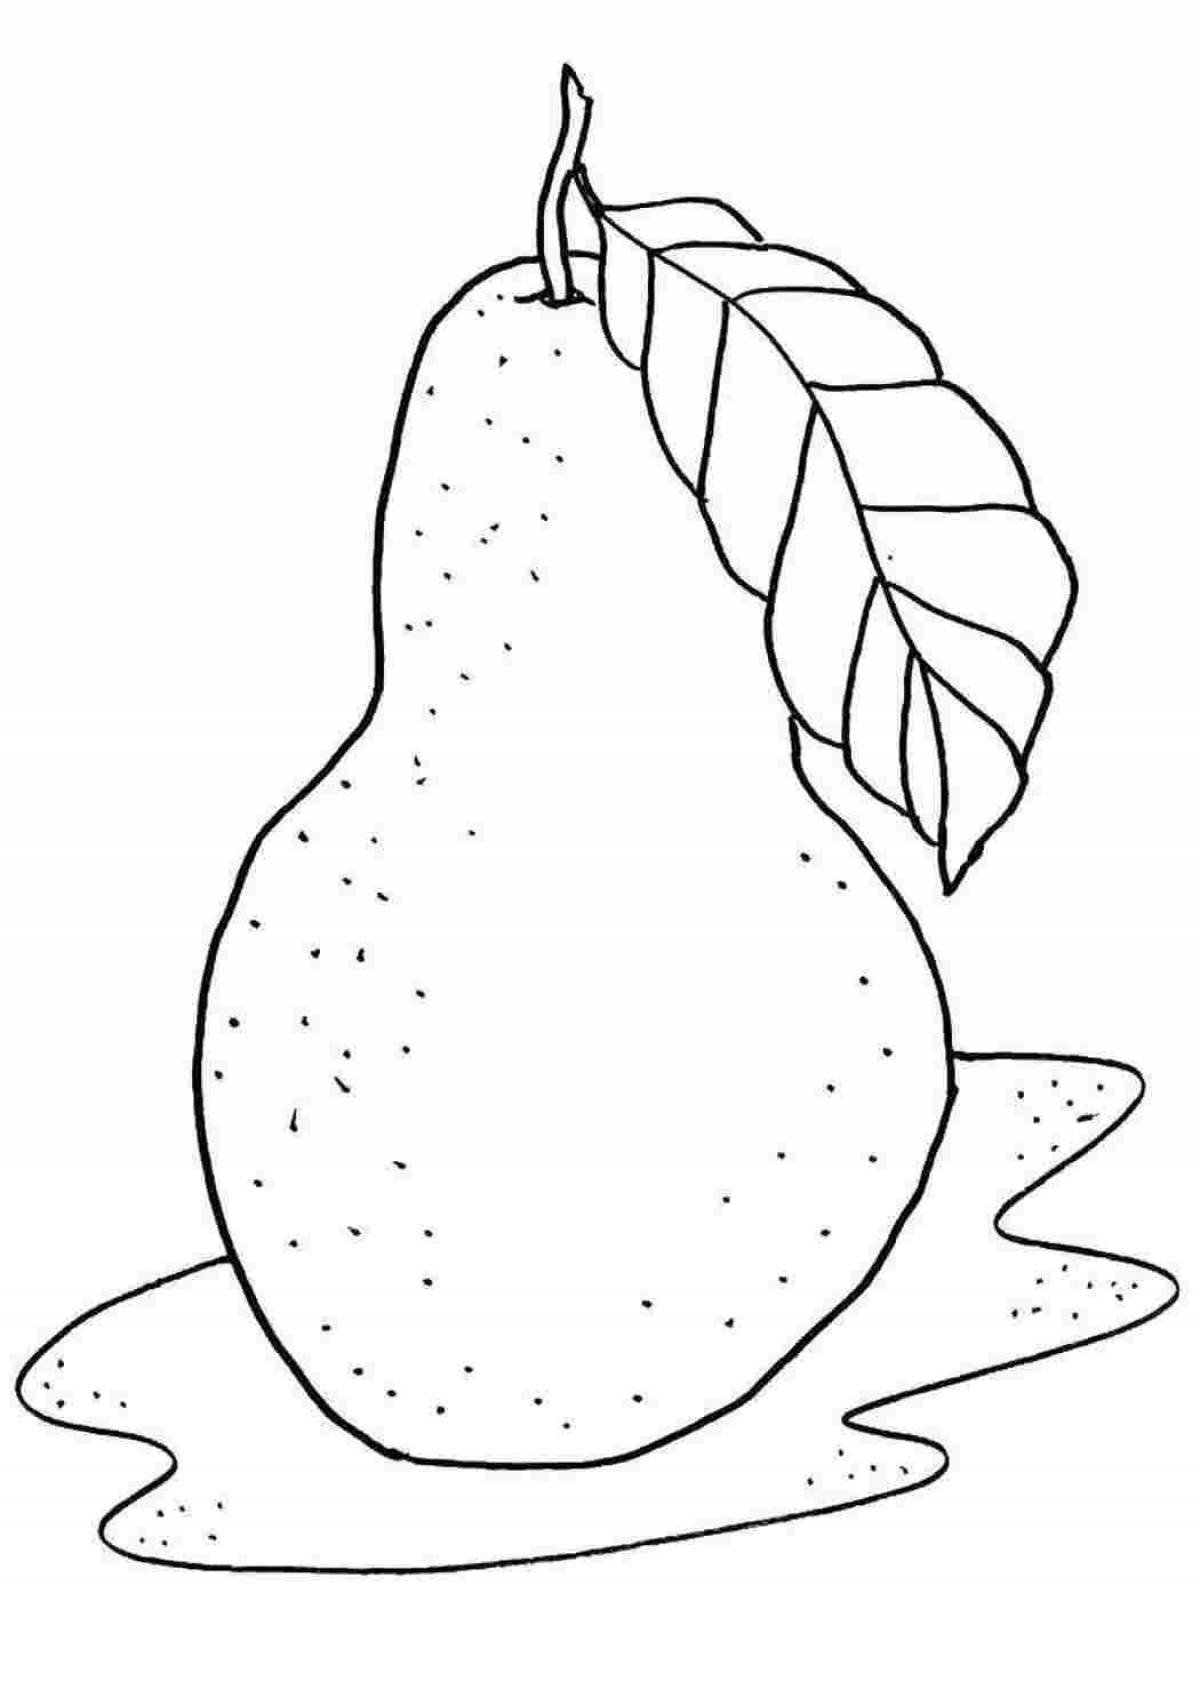 Playful pear coloring book for 2-3 year olds